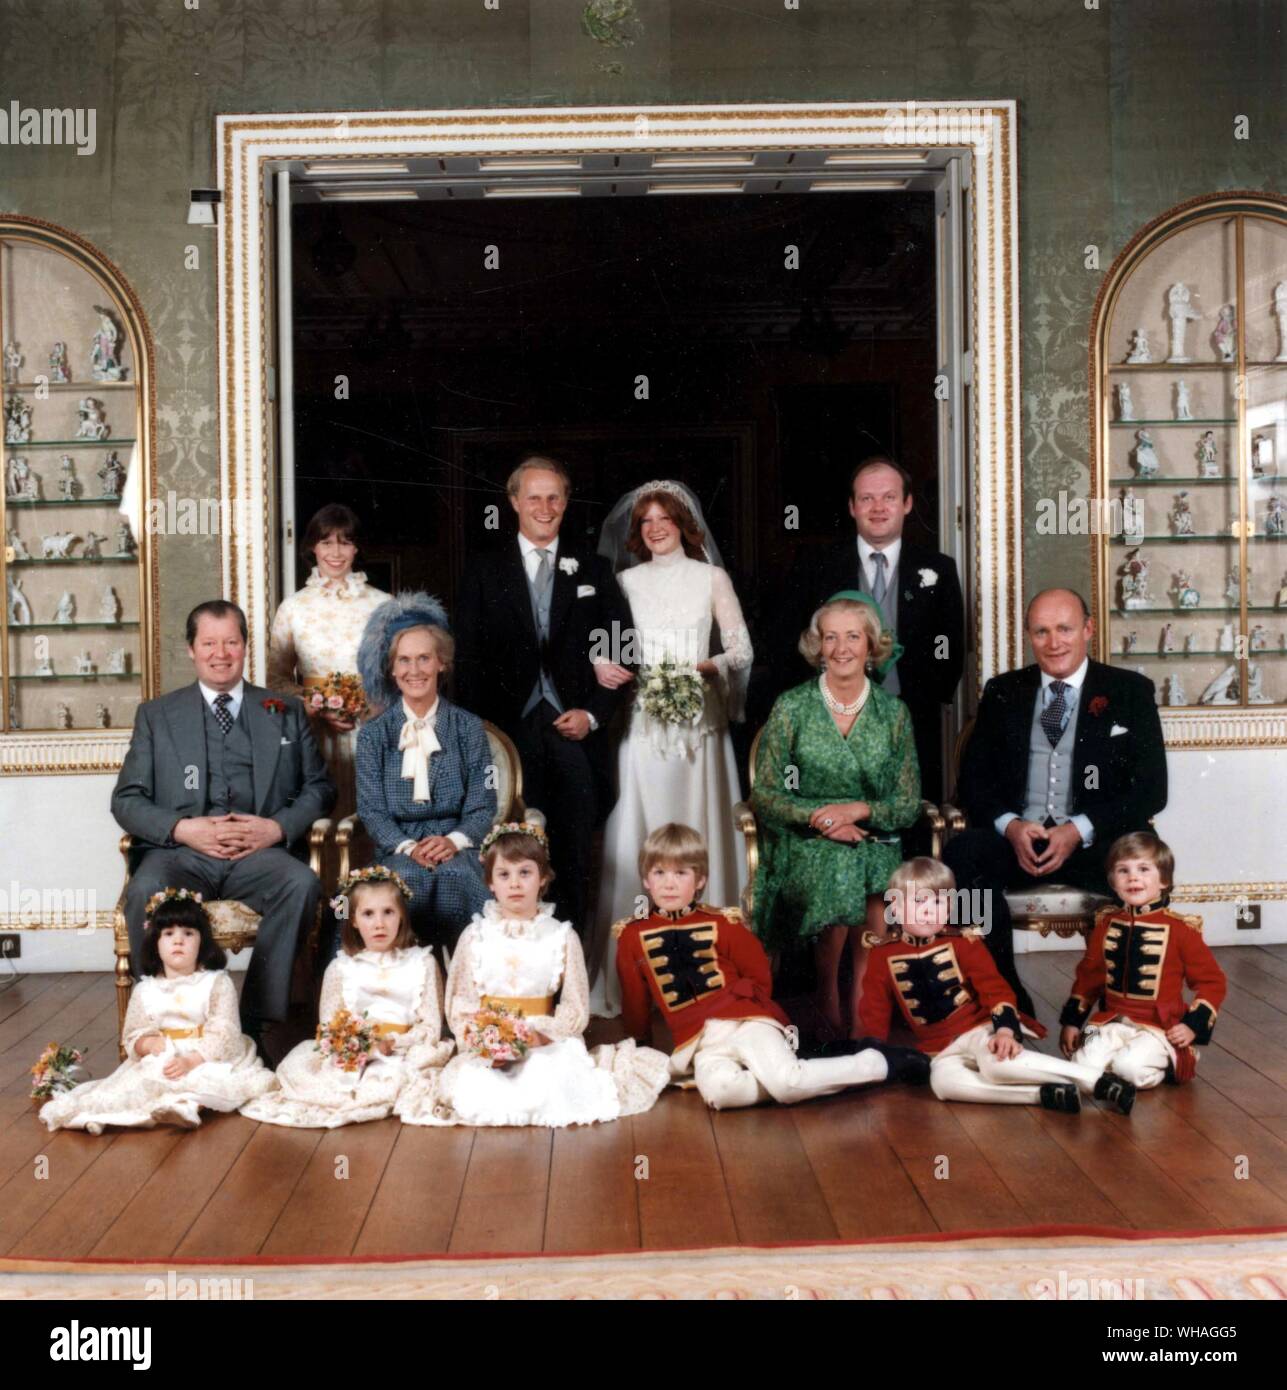 Lady Sarah Spencer married Neil McCorquodale at St Marys Church Great Brington near Althorp on 17th May 1980. Lady Sarah Armstrong Jones in the back row was a bridesmaid, Earl Spencer is seated on the left of the picture beside the grooms mother with the Hon Mrs Peter Shand Kydd and Mr Alistair McCorquodale to the right Stock Photo